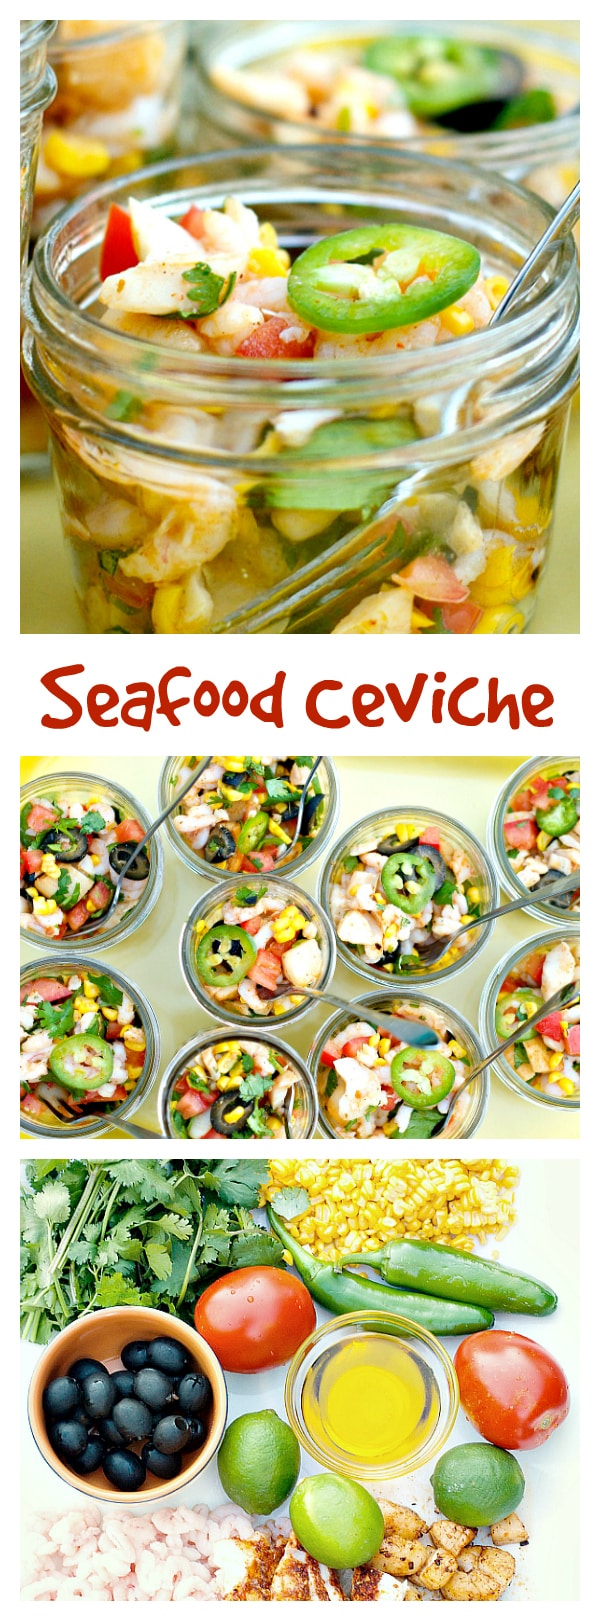 Lighten up entertaining with this fresh, healthy appetizer or salad: Seafood Ceviche